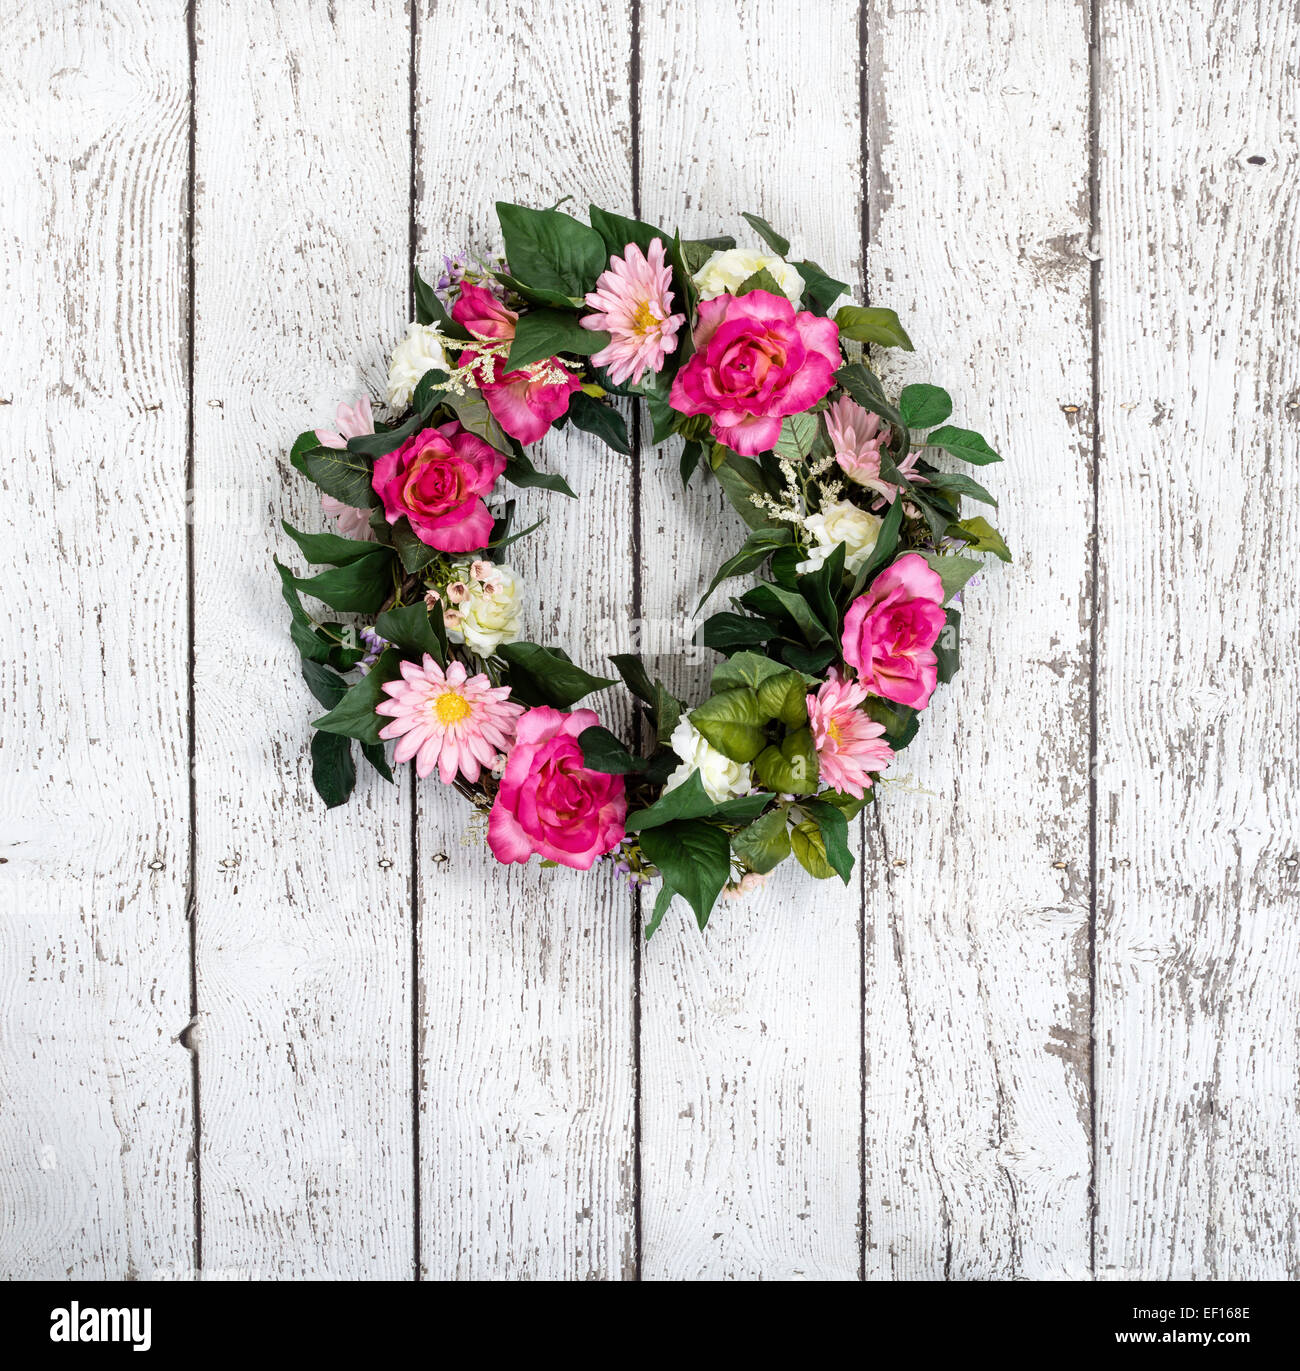 Flower wreath hanging against vintage white background Stock Photo